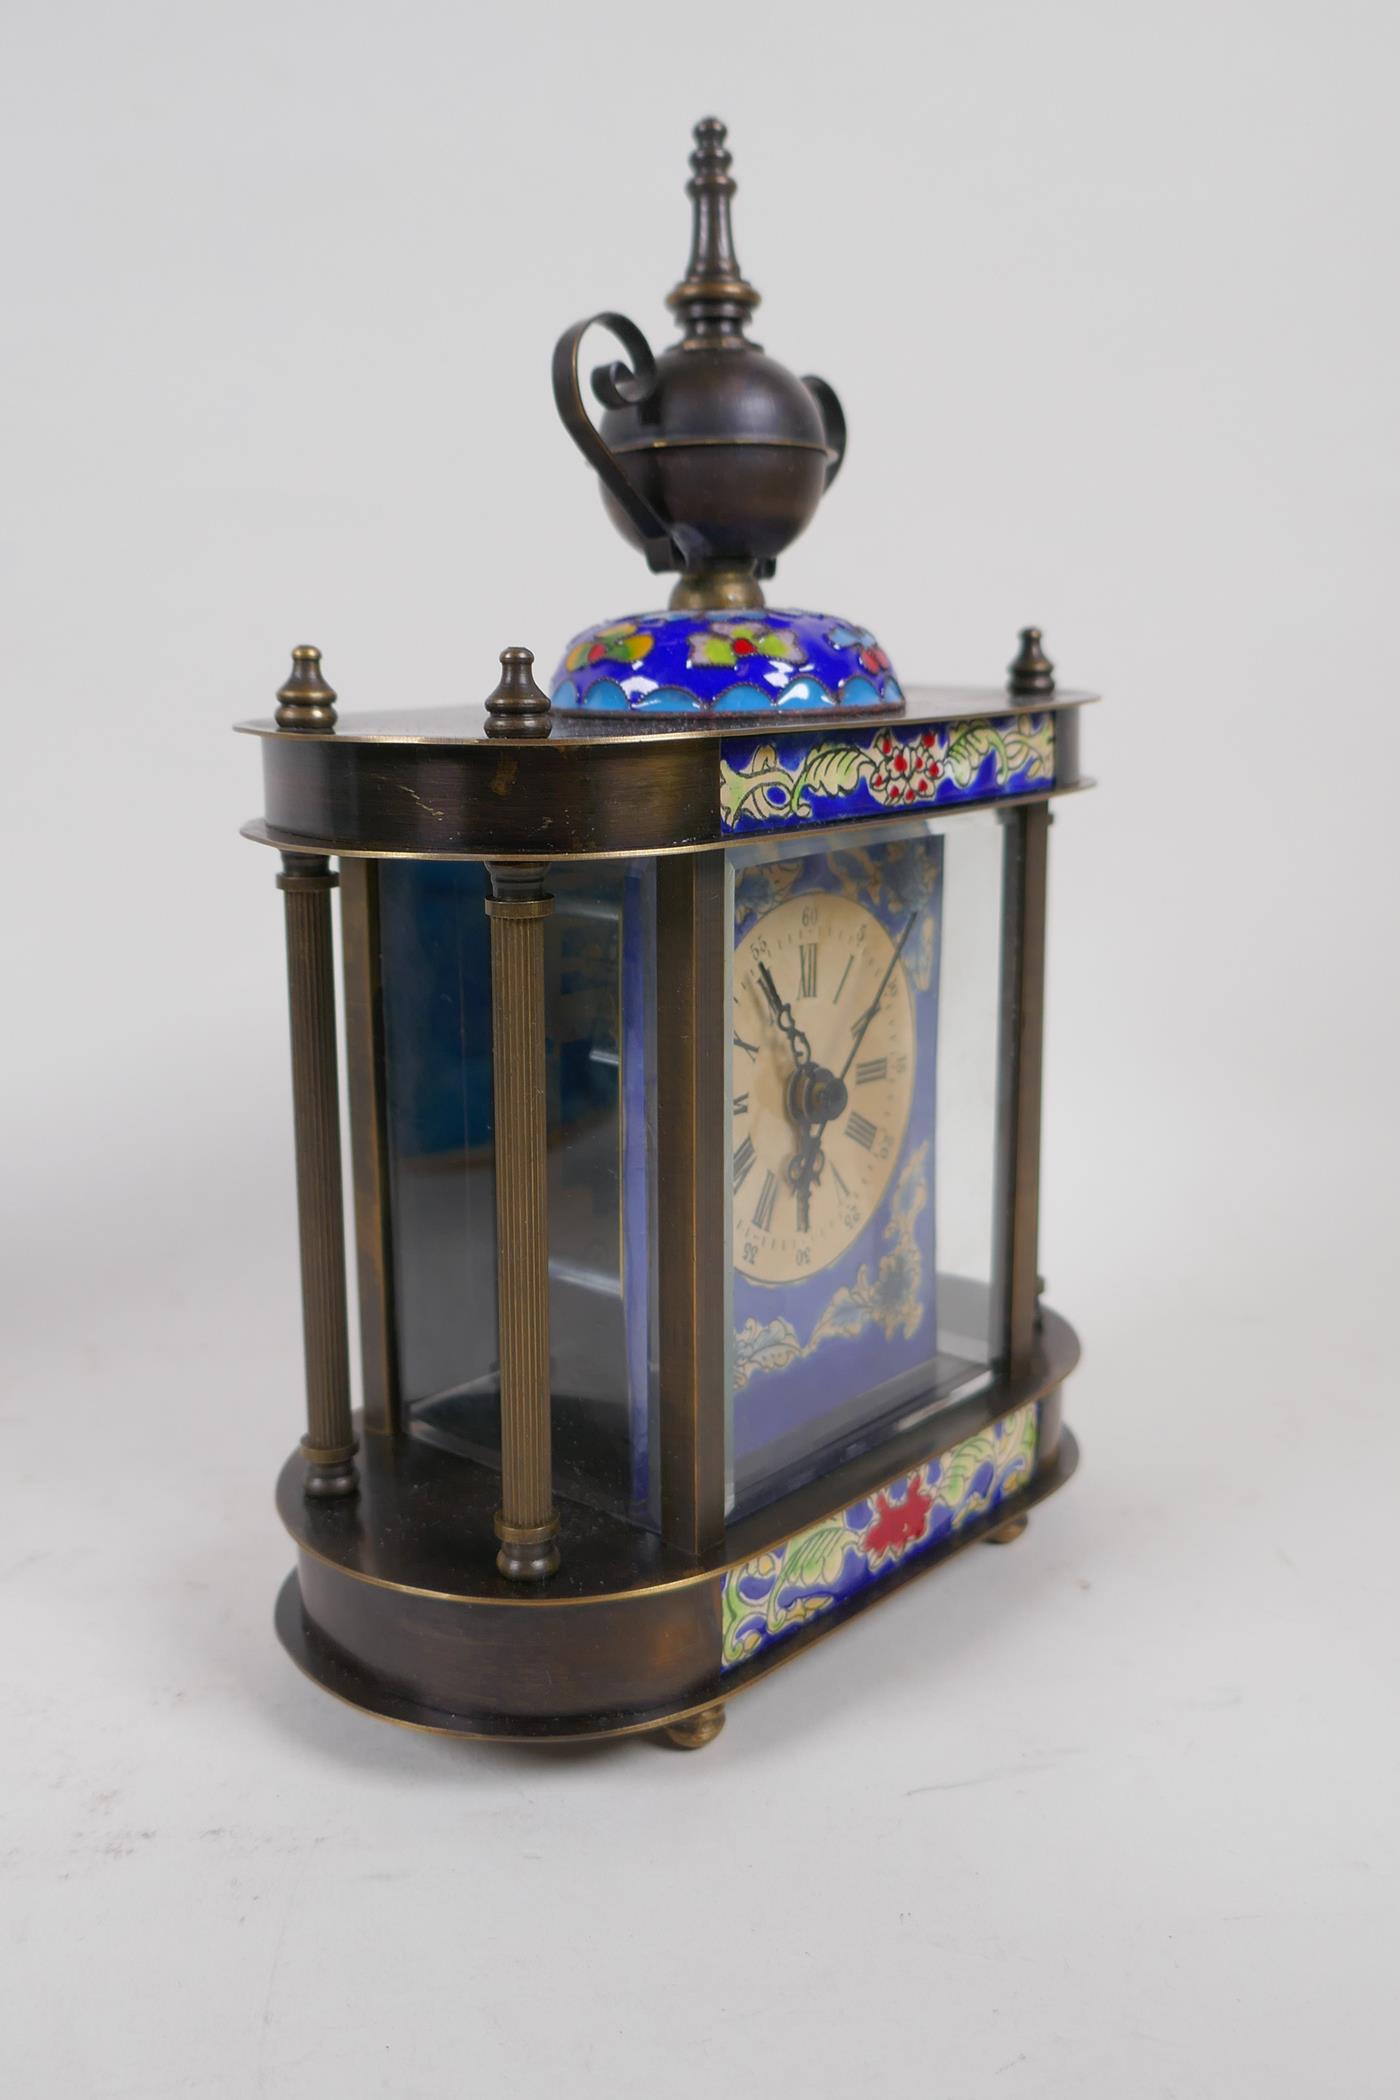 A brass cased mantel clock with cloisonne enamel style decorative panels, 21cm high - Image 2 of 6